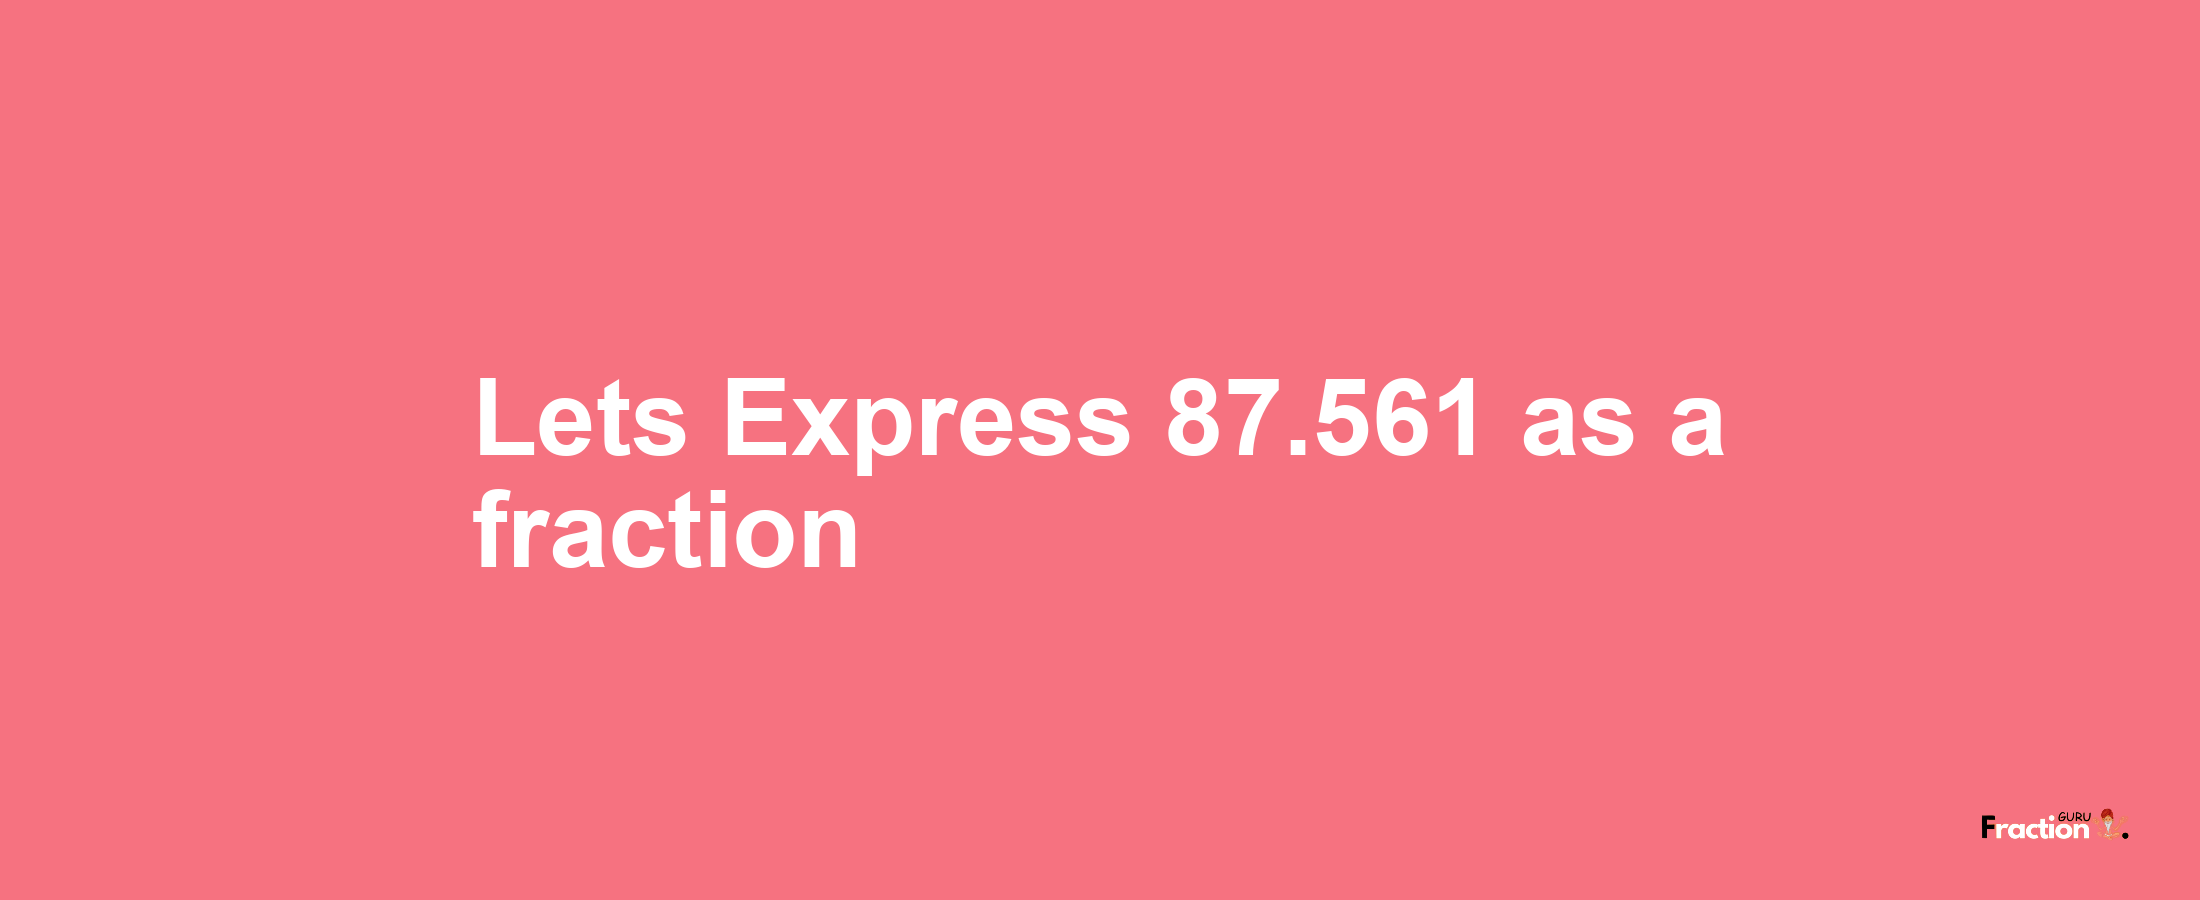 Lets Express 87.561 as afraction